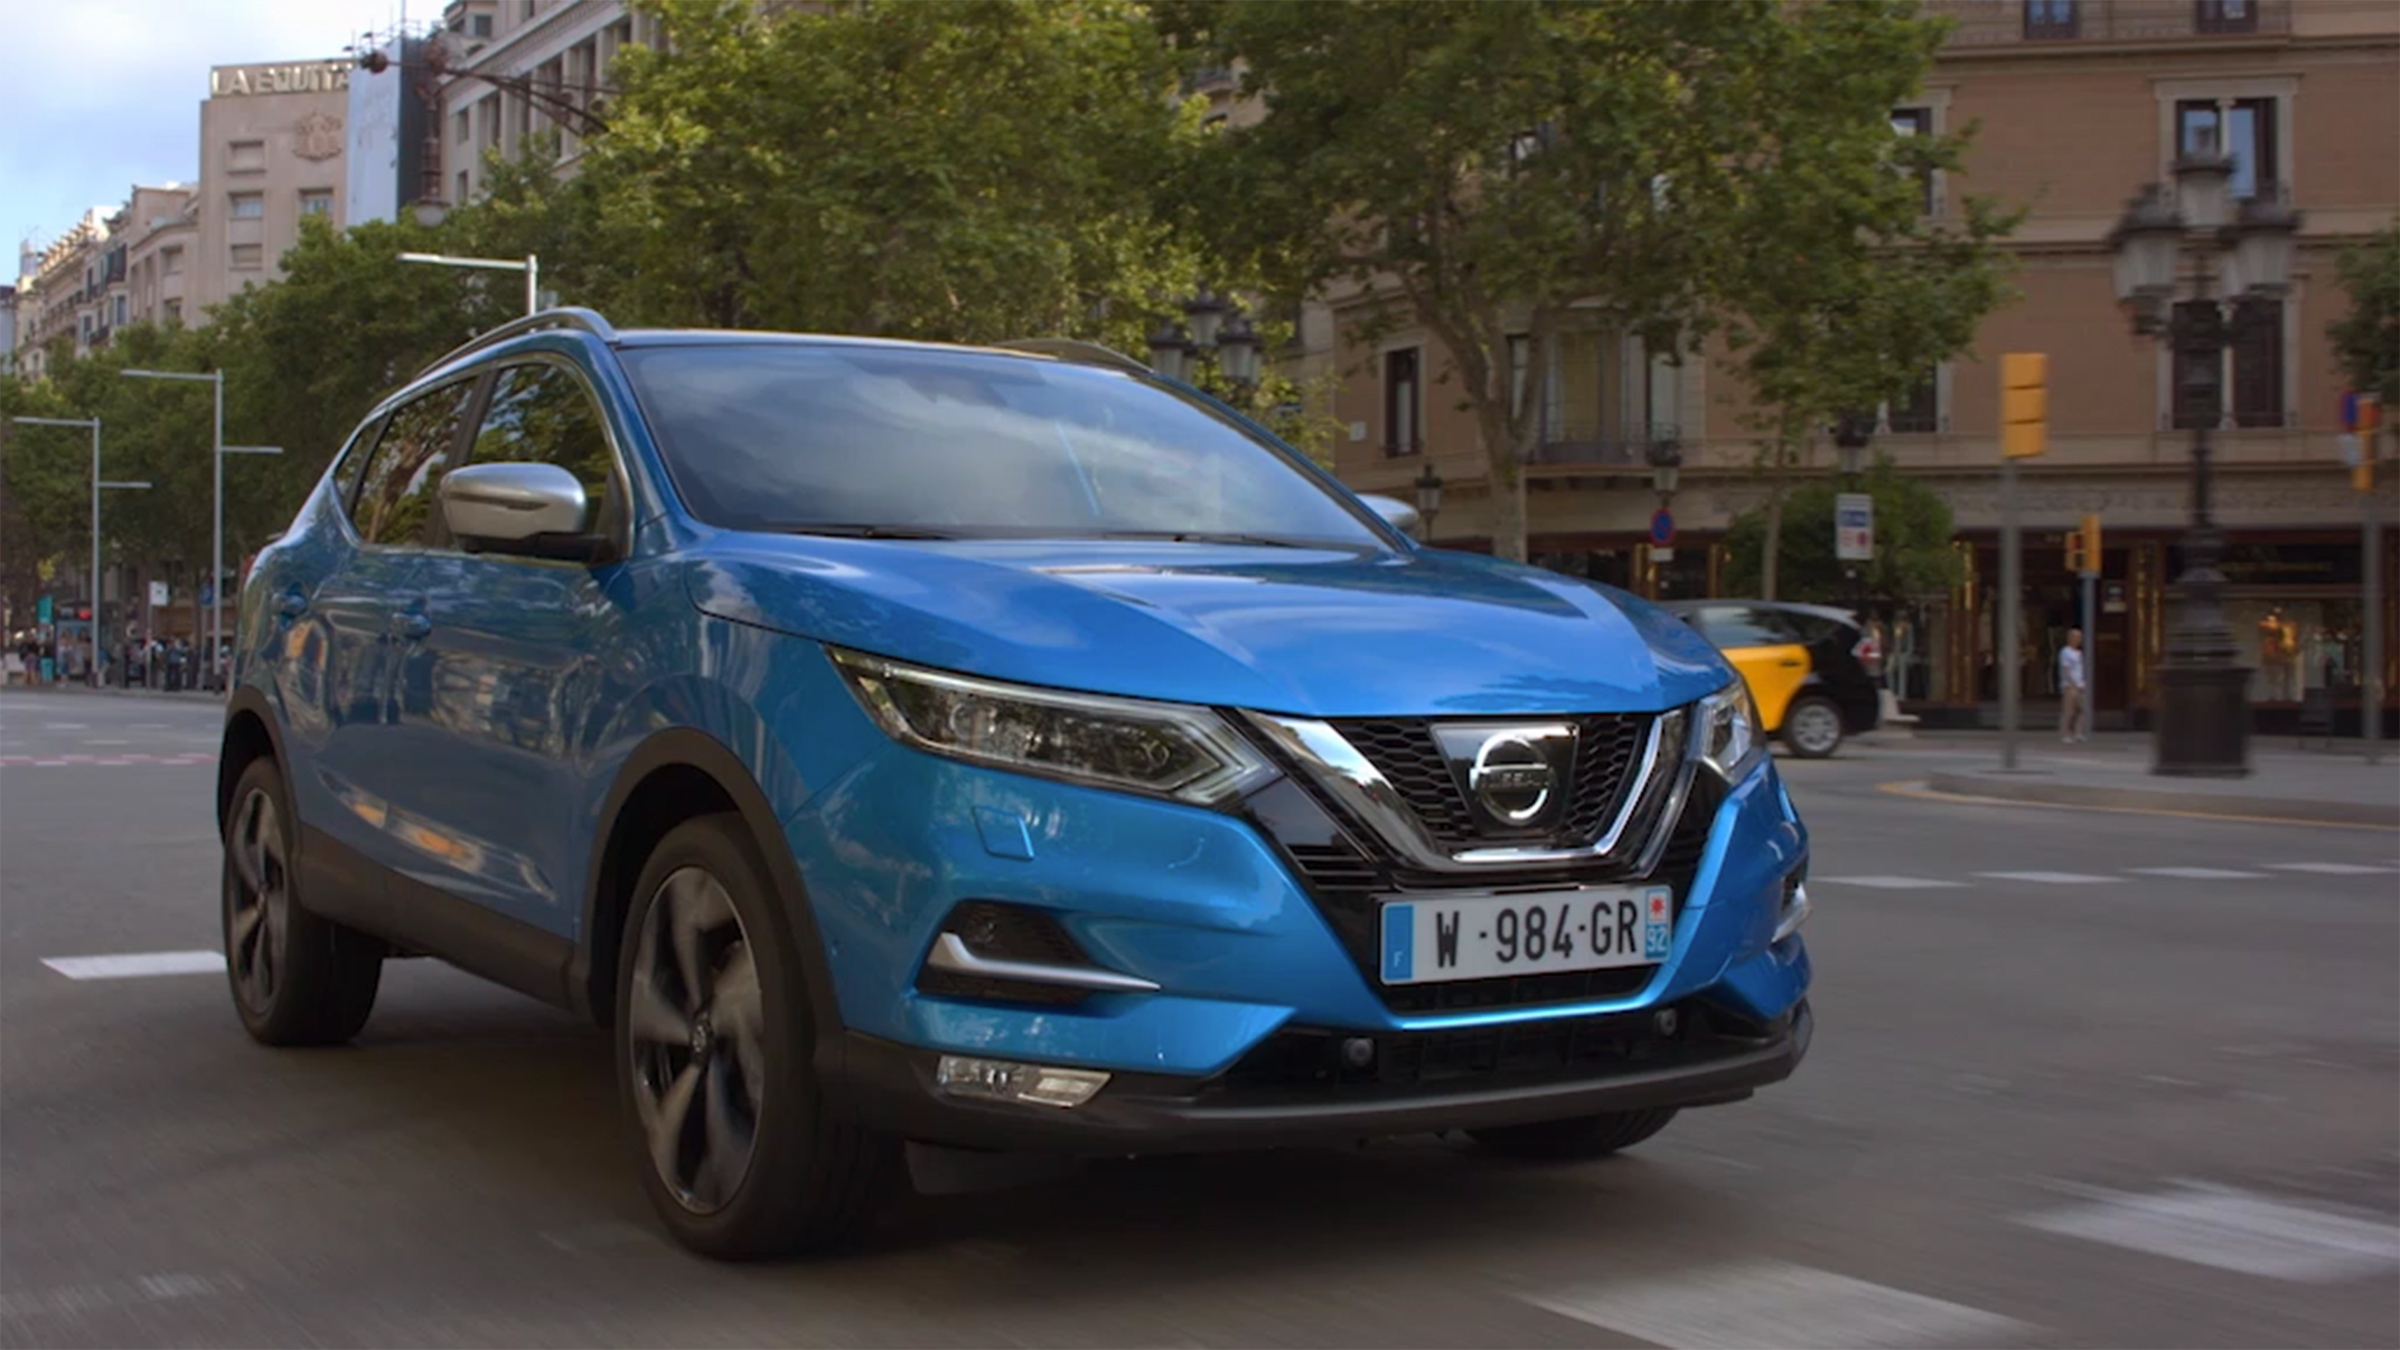 Nissan Qashqai driving in the city preview image